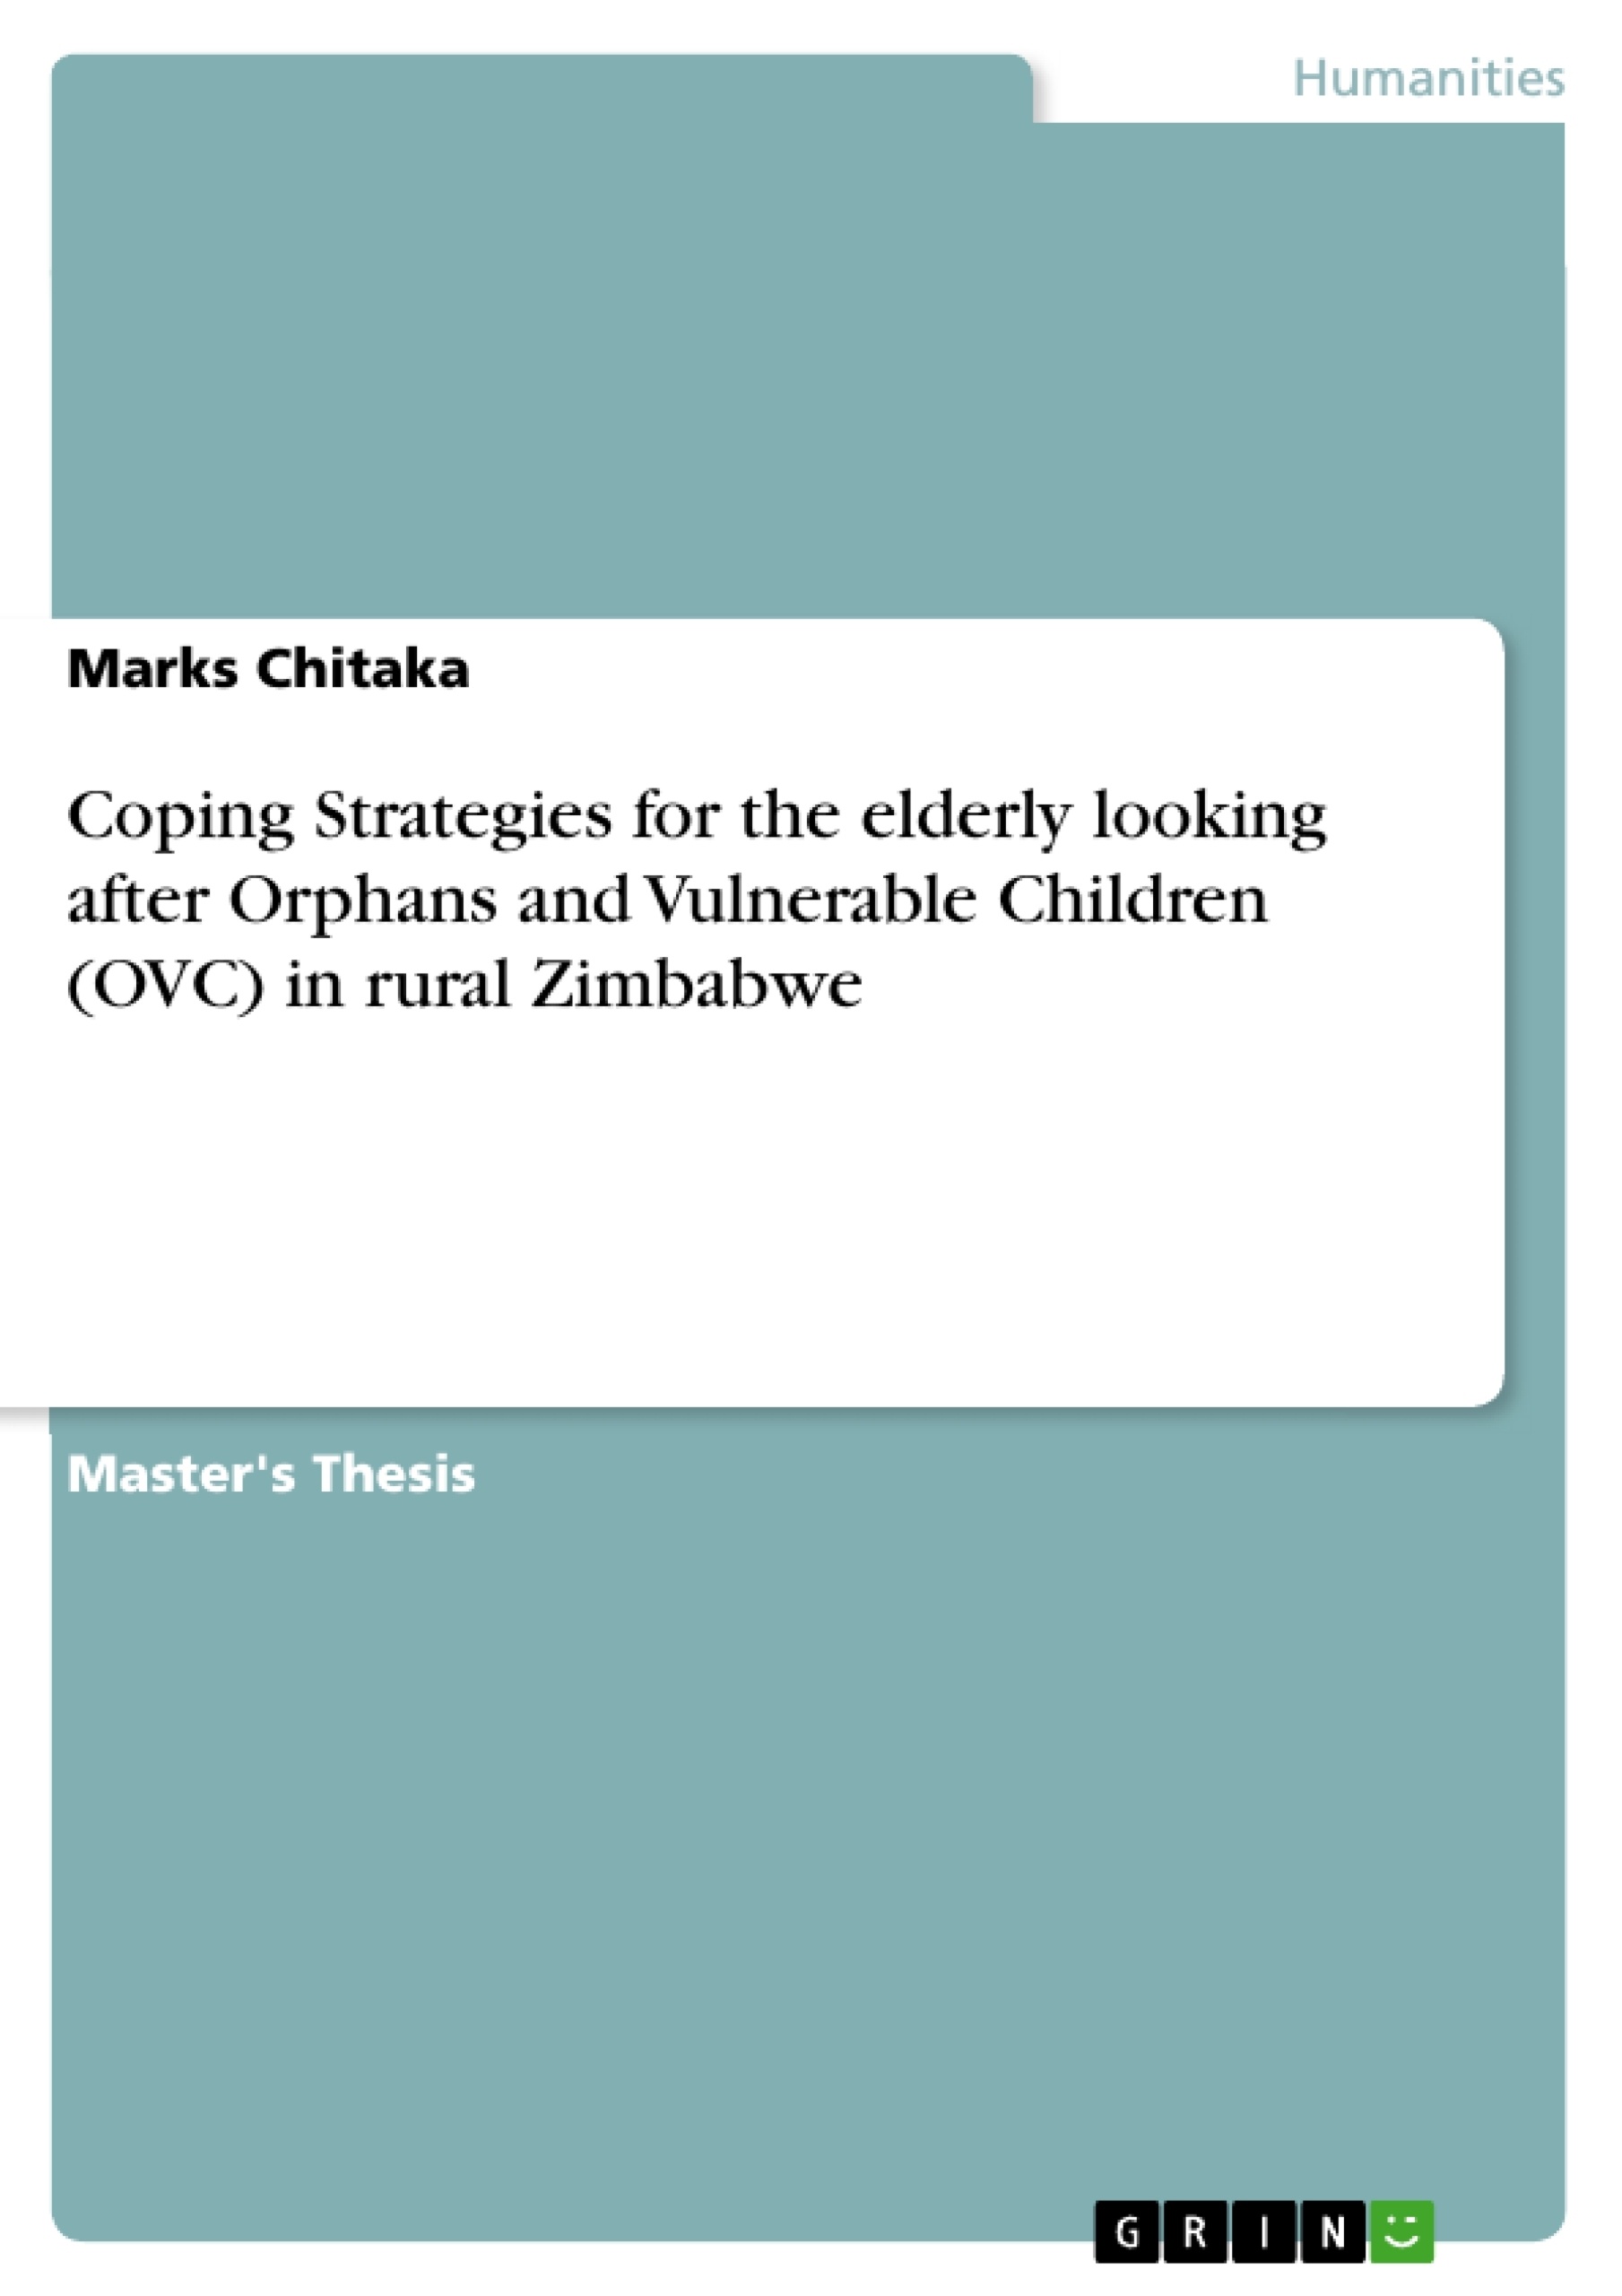 Title: Coping Strategies for the elderly looking after Orphans and Vulnerable Children (OVC) in rural Zimbabwe